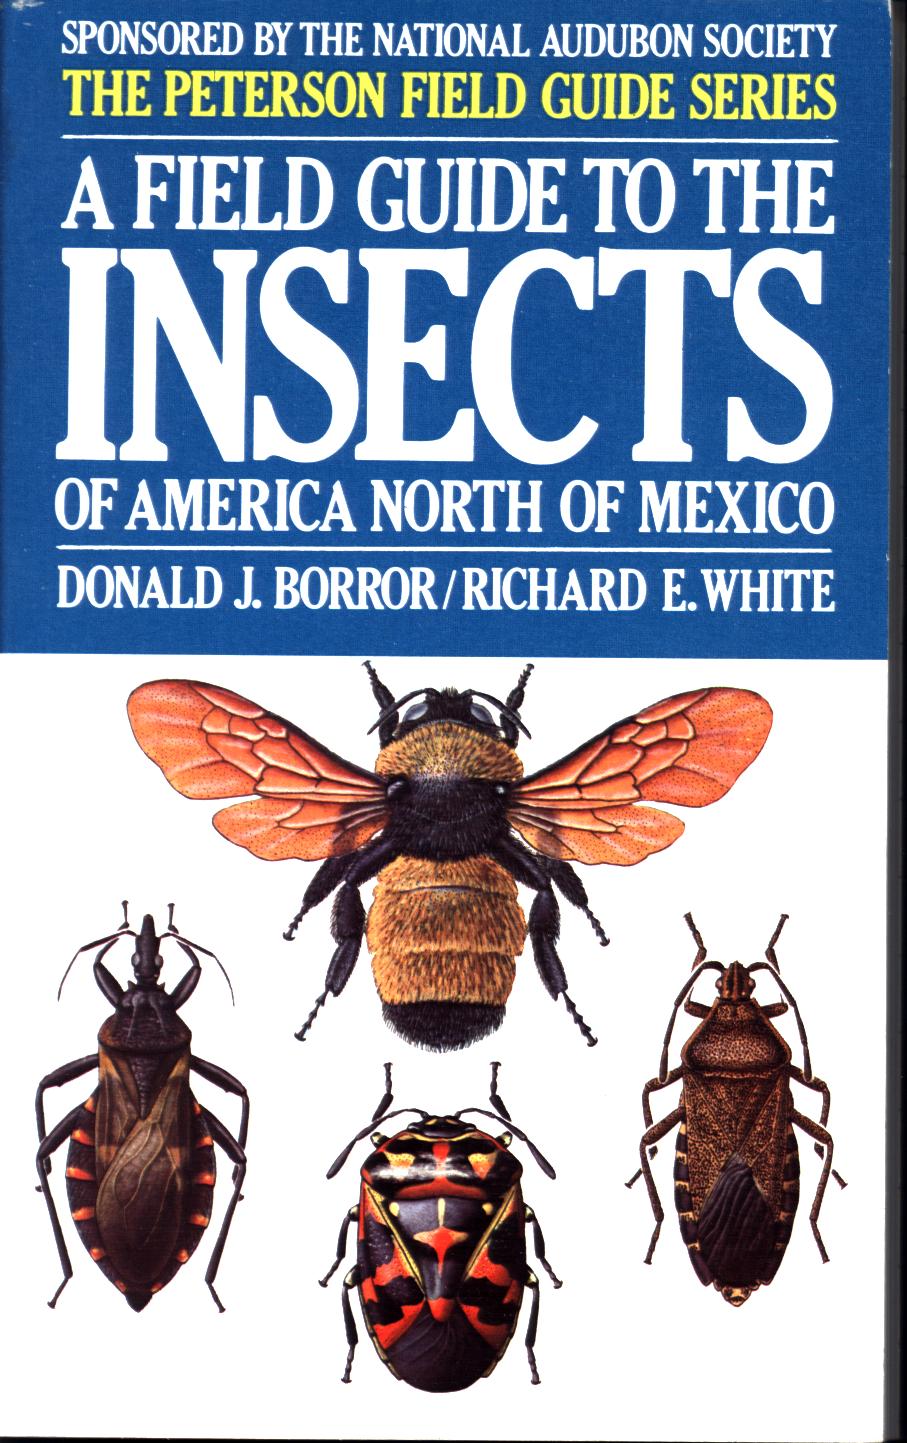 A FIELD GUIDE TO THE INSECTS OF AMERICAN NORTH OF MEXICO.